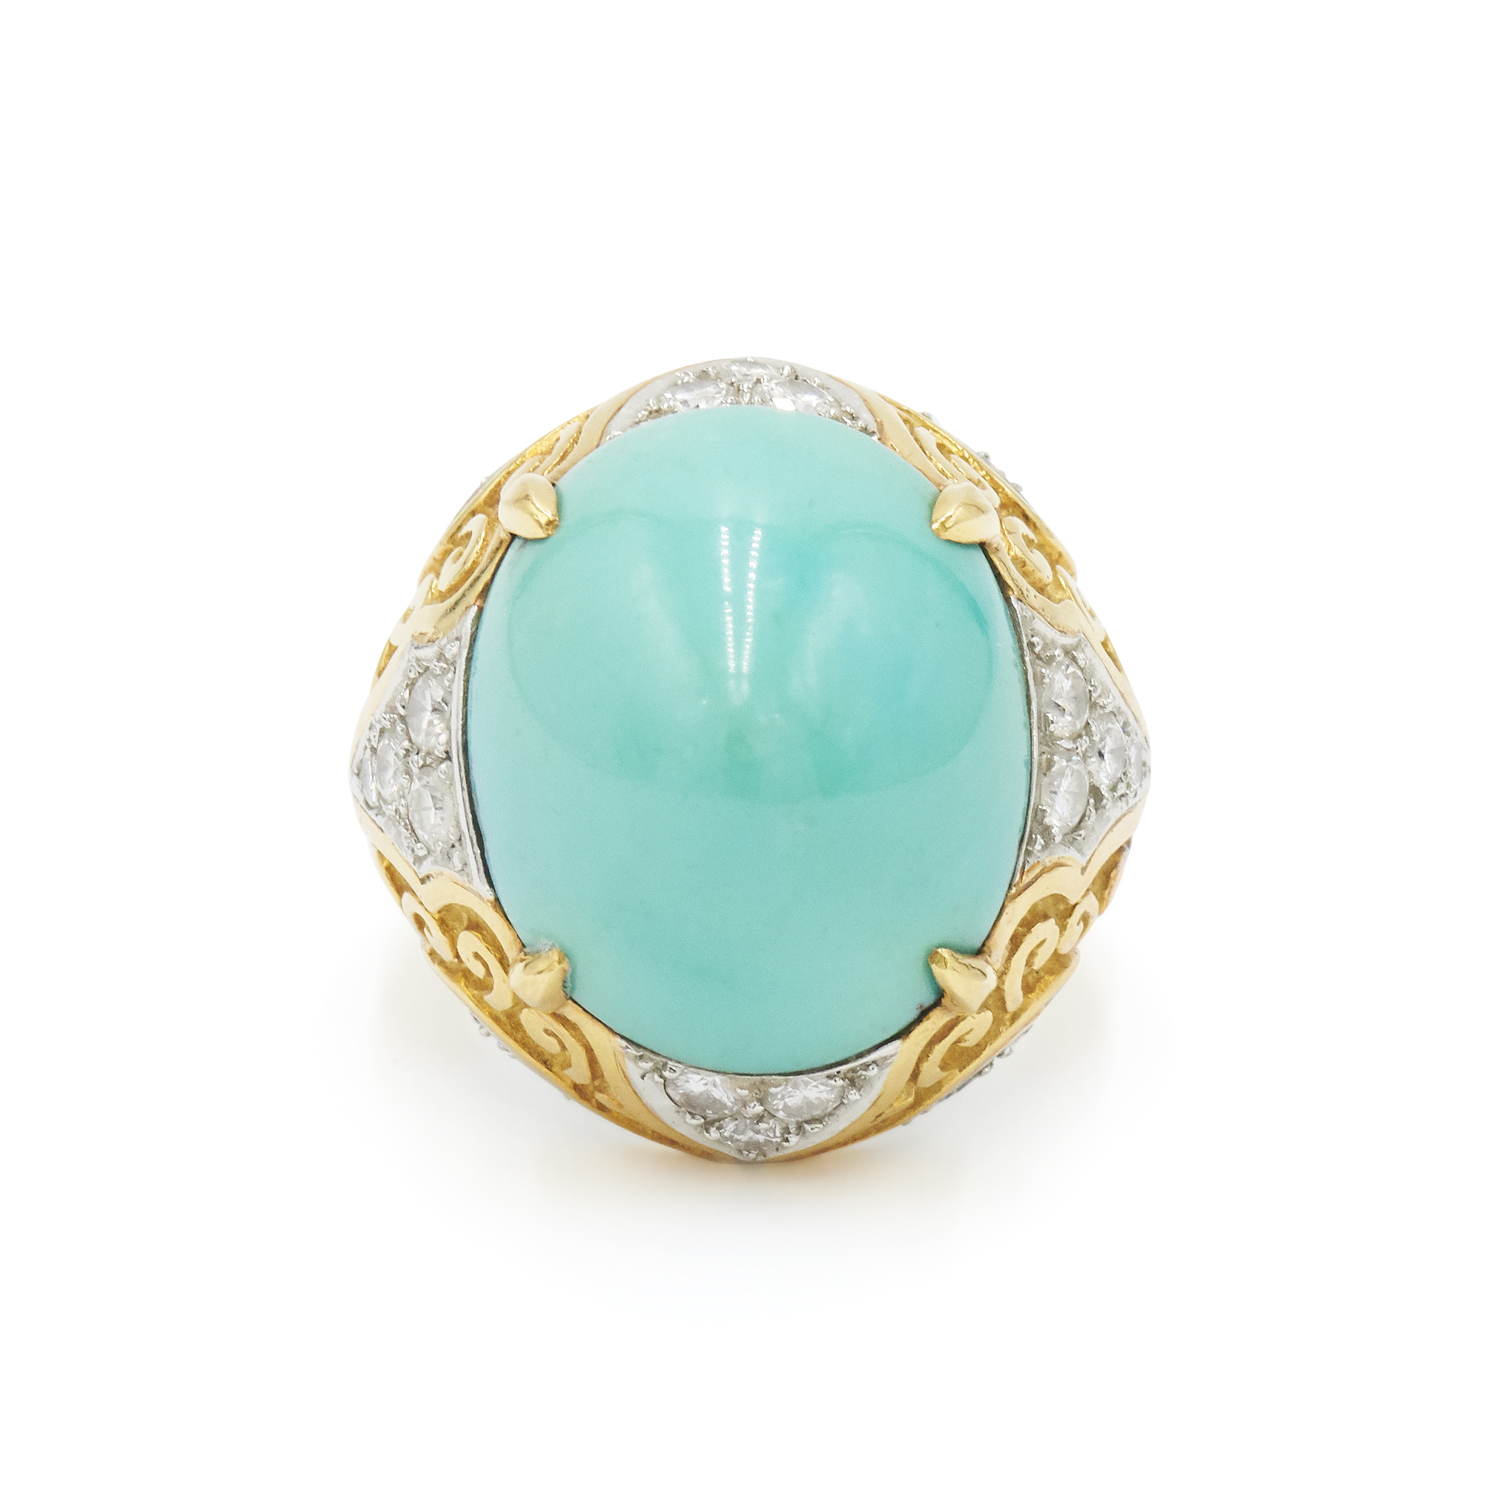 18K Yellow Gold Turquoise and Diamond Ring by Van Cleef & Arpels, Serial FL41818